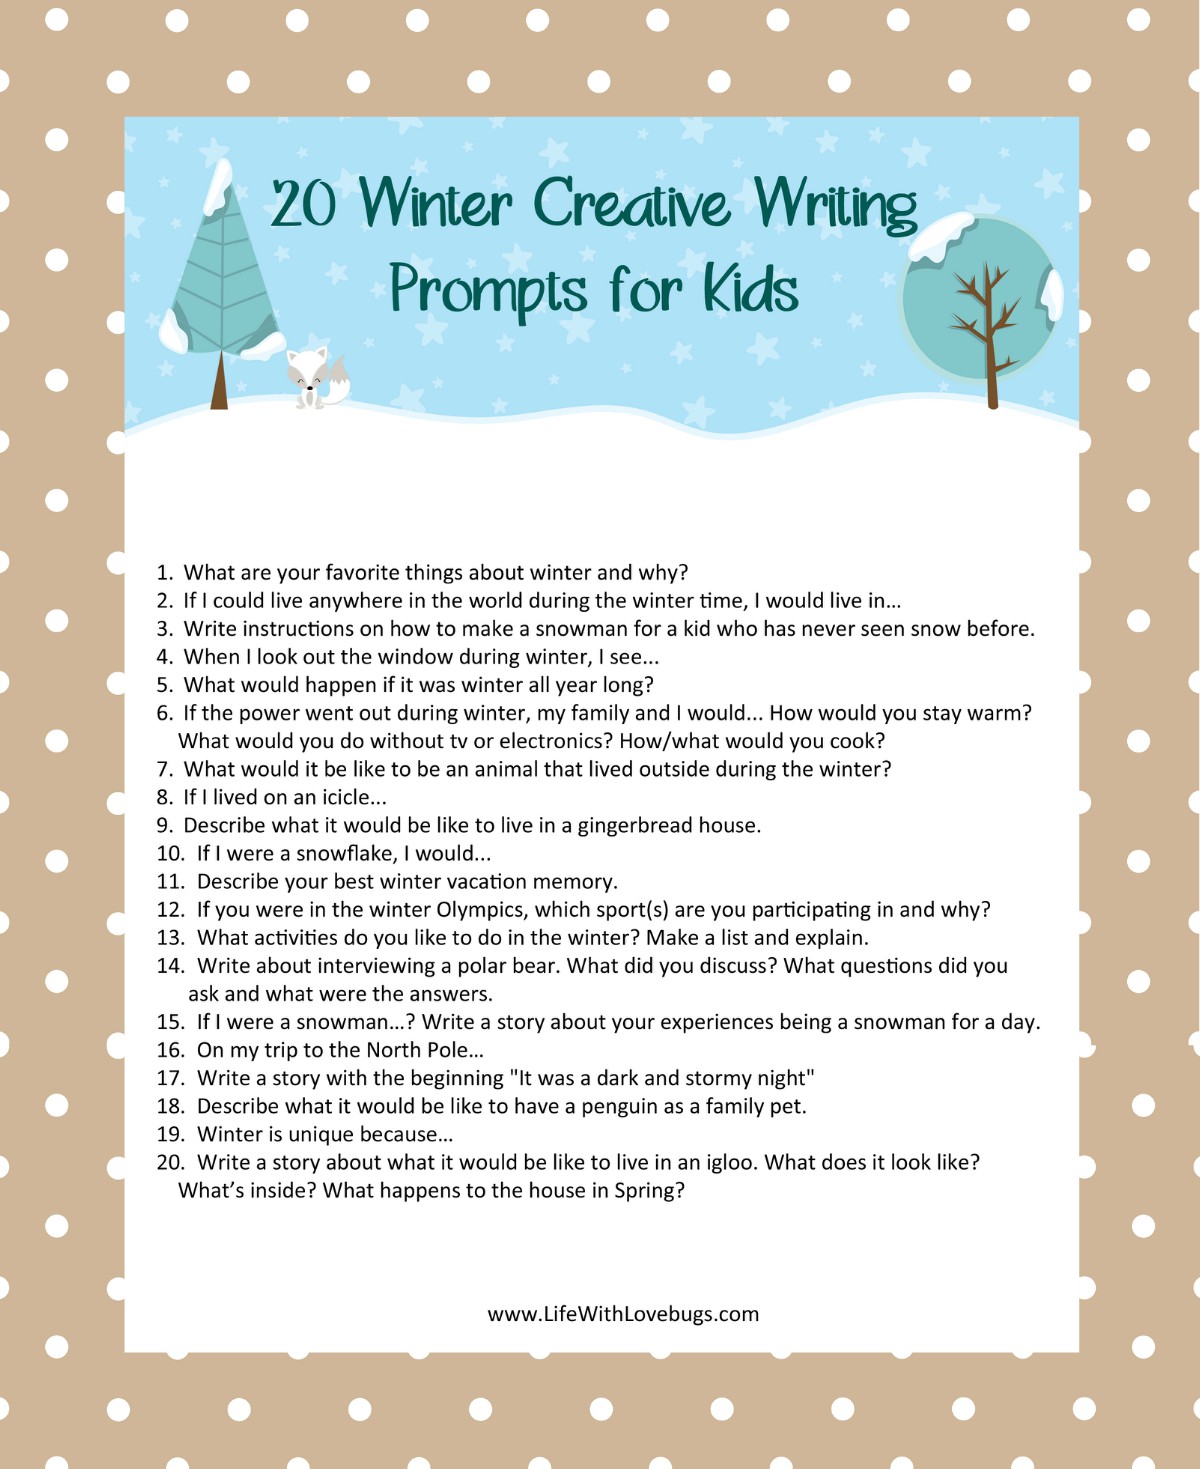 20 Winter Writing Prompts for Kids - Life With Lovebugs